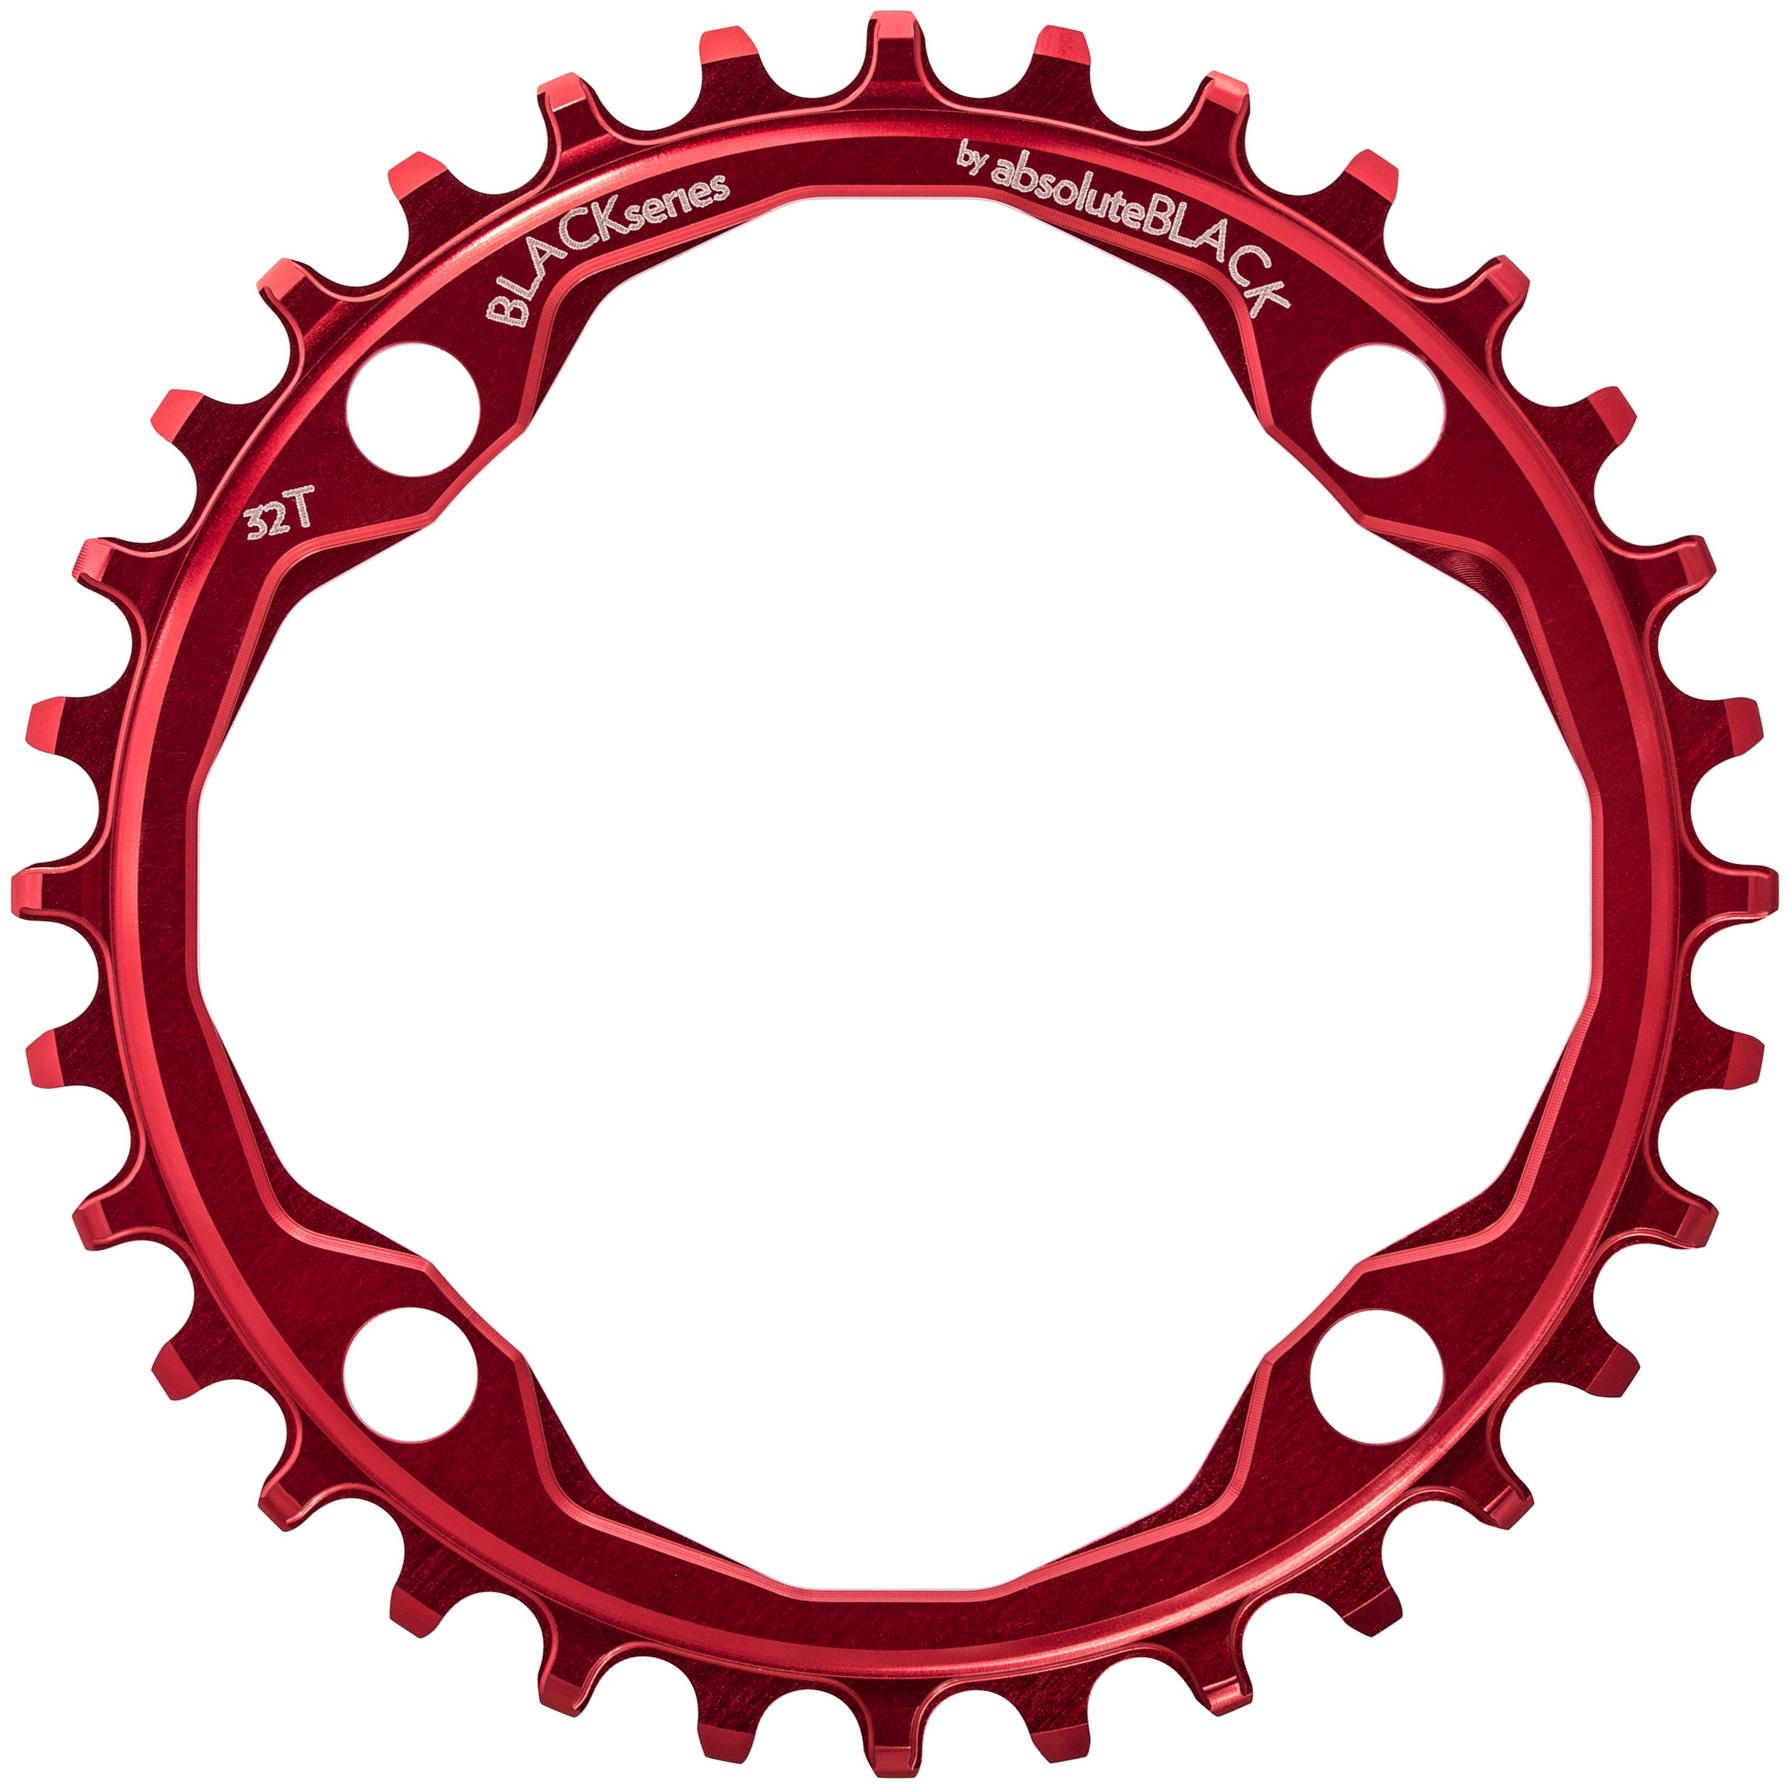 Black By Absolutebla Narrow Wide Chainring - Red